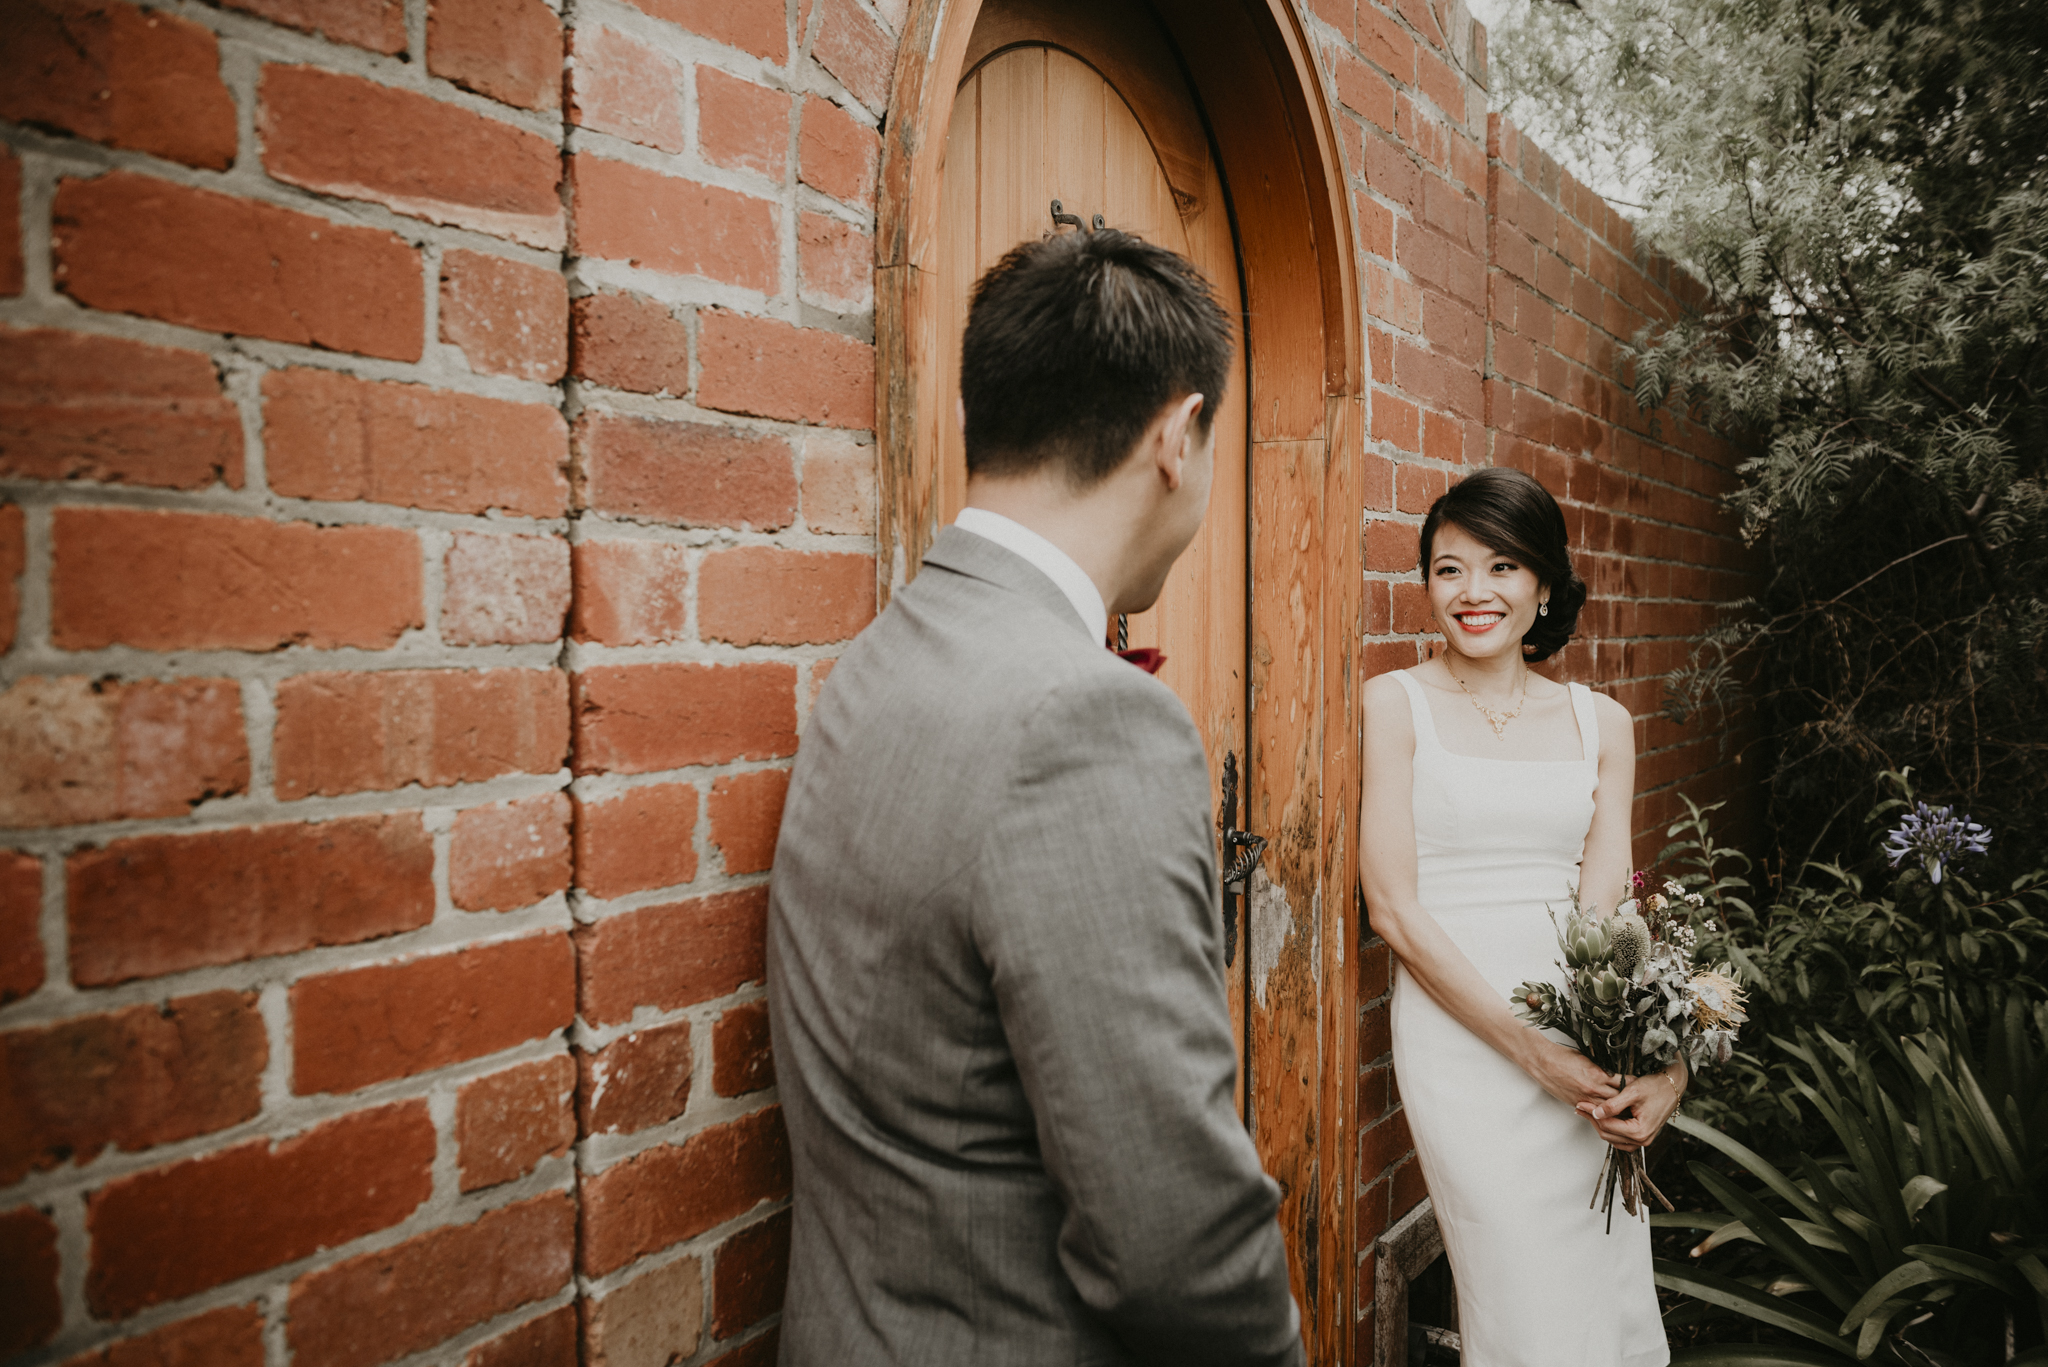 agnes-duy-15th-december-2018-chinese-vietnamese-wedding-tea-ceremony-yarraville-home-house-documentary-candid-photographer-sarah-matler-photography-98